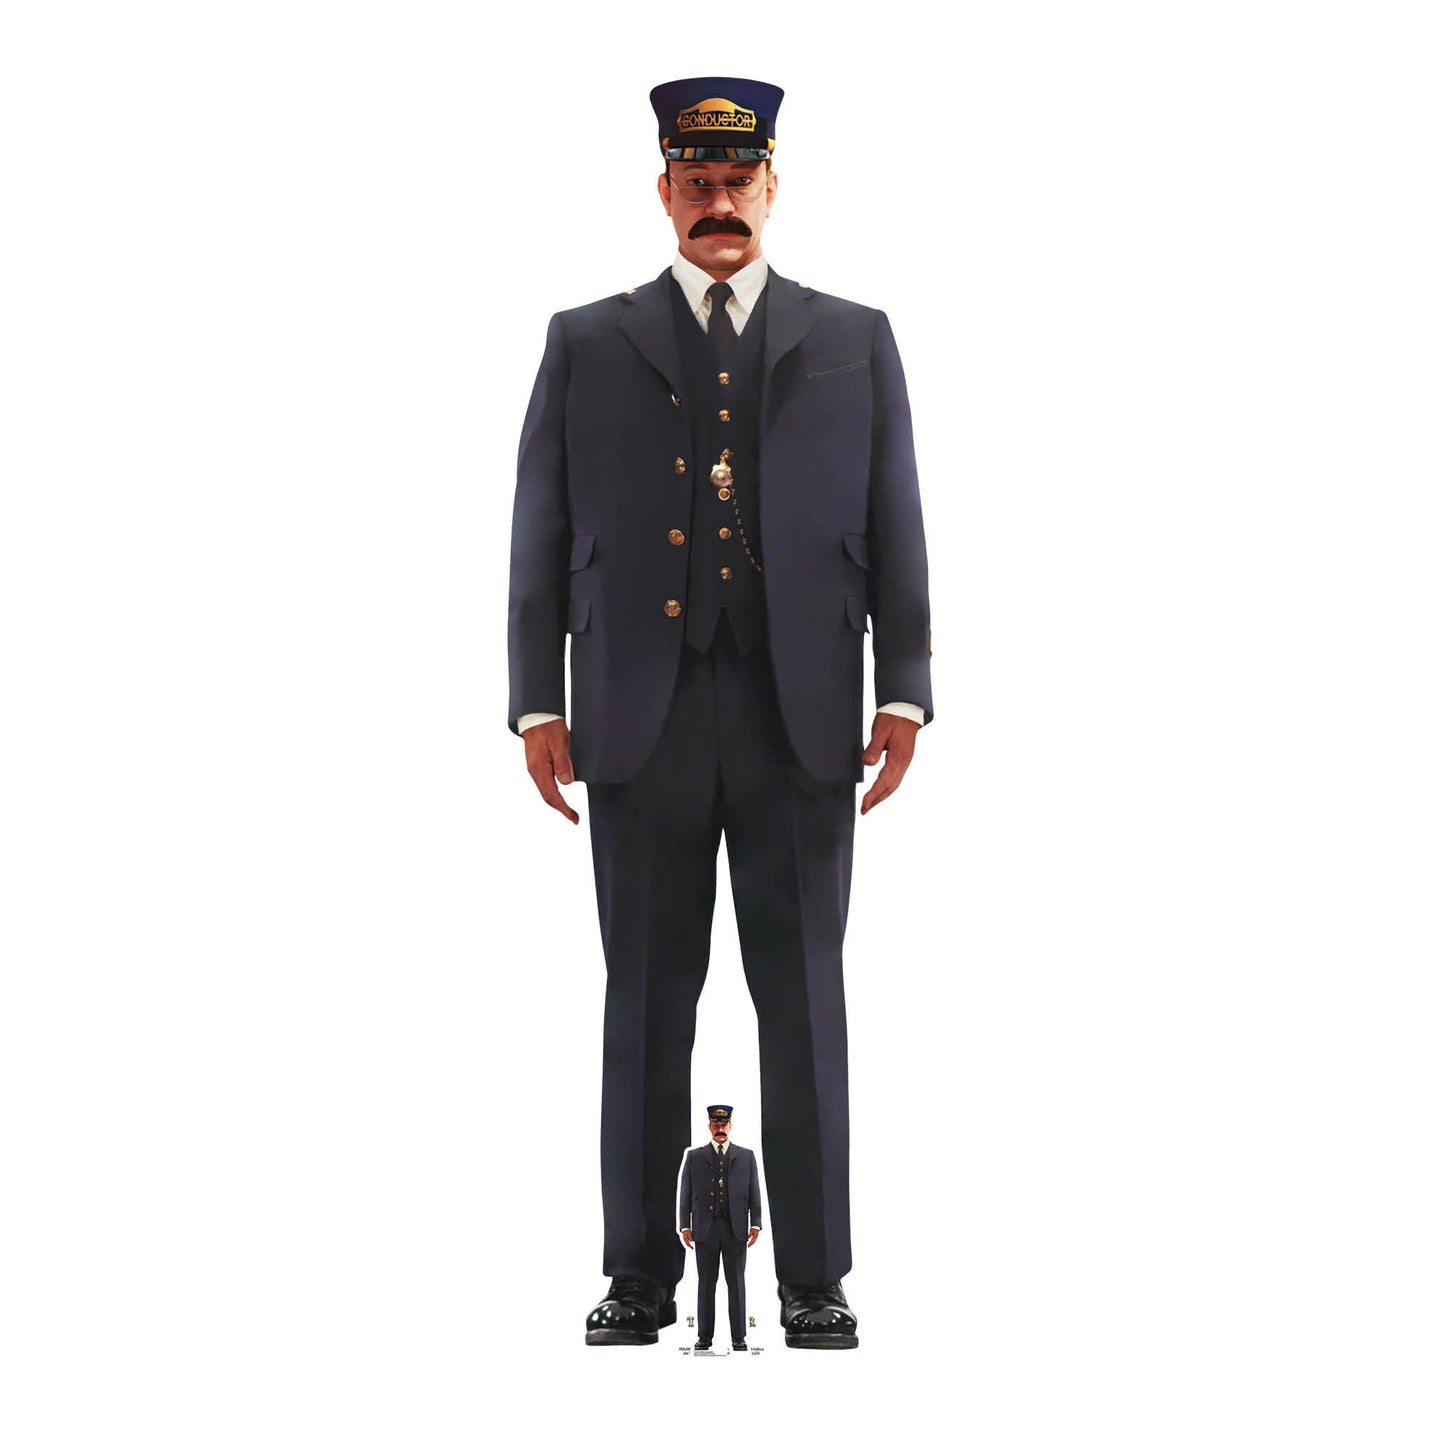 SC4379 Conductor Polar Express Cardboard Cut Out Height 184cm